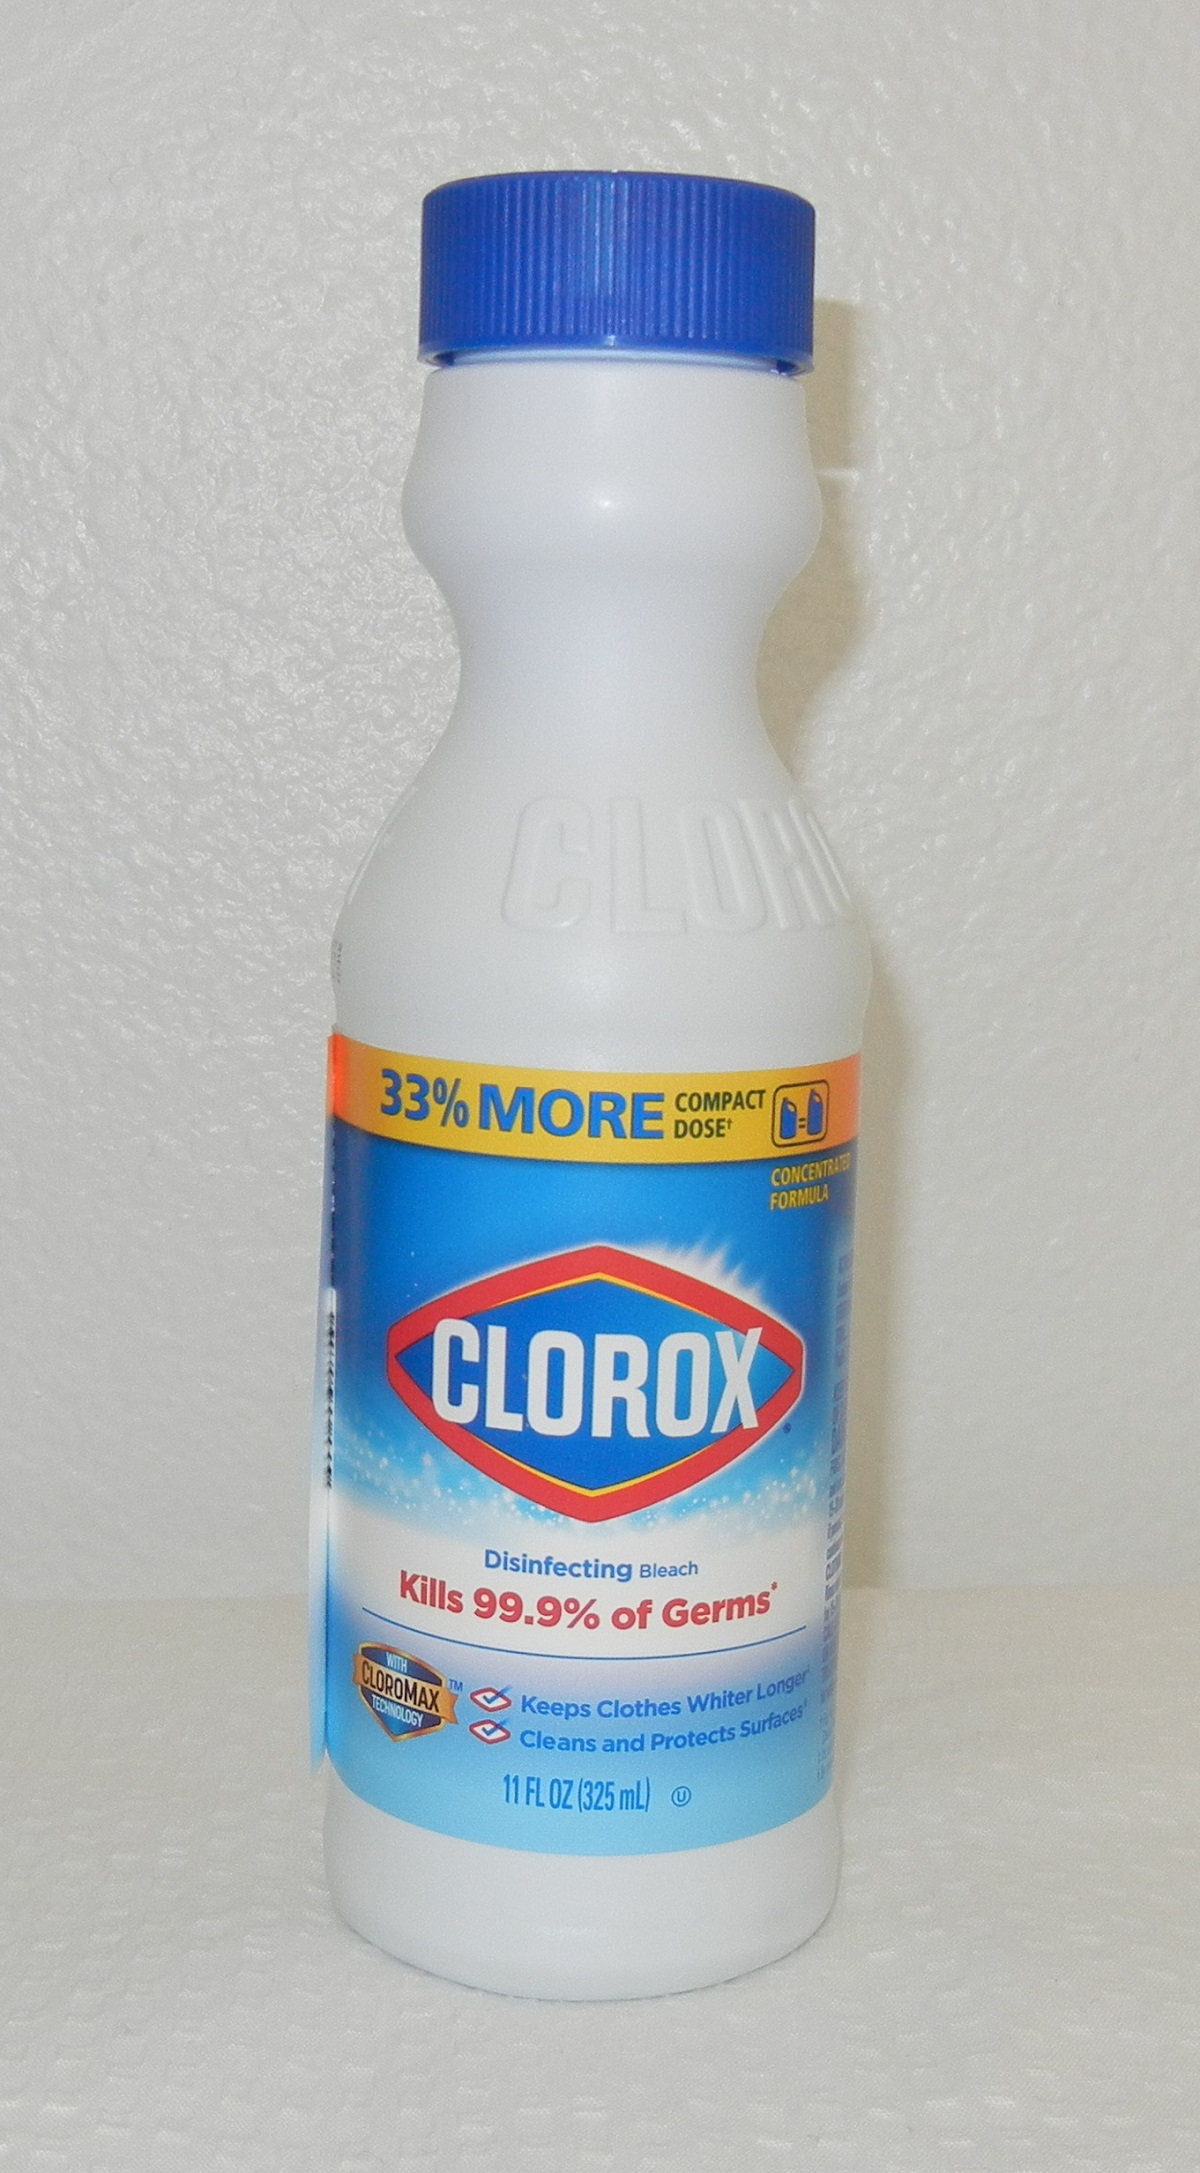 Clorox Disinfecting Bleach Original Concentrated Formula - dilute to use